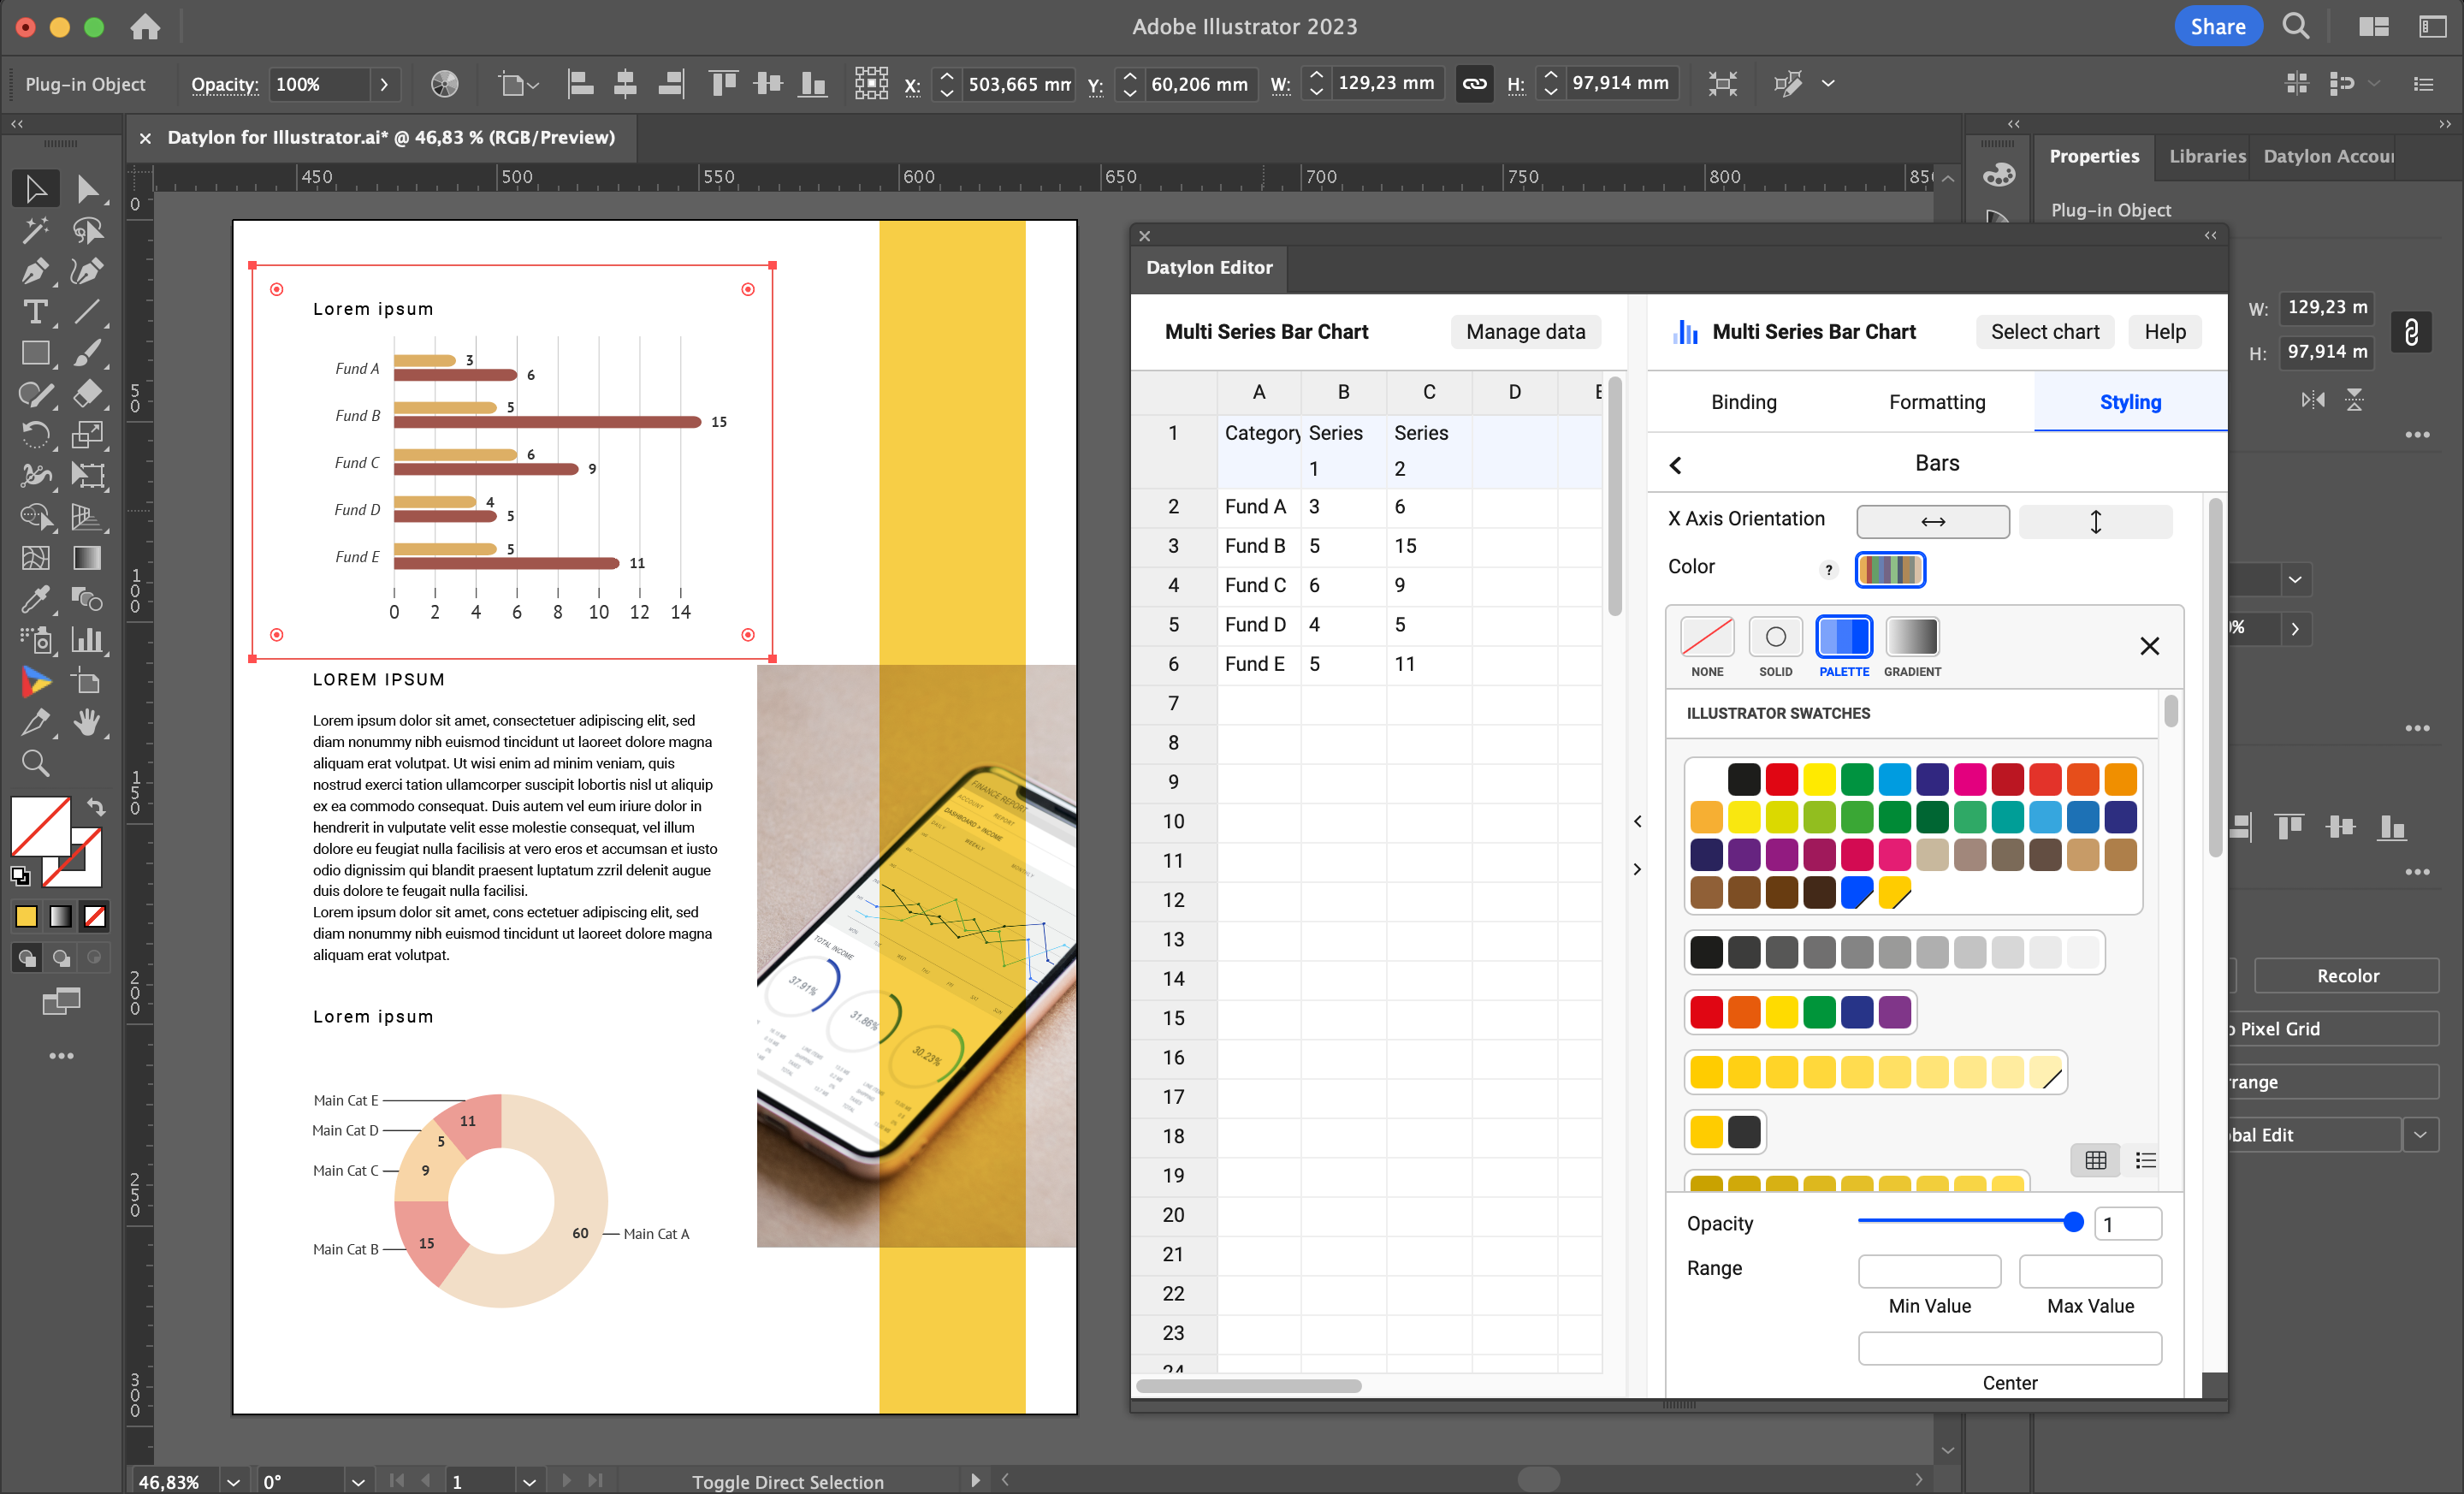 You can edit and update many styling properties of your charts. Full freedom of design!